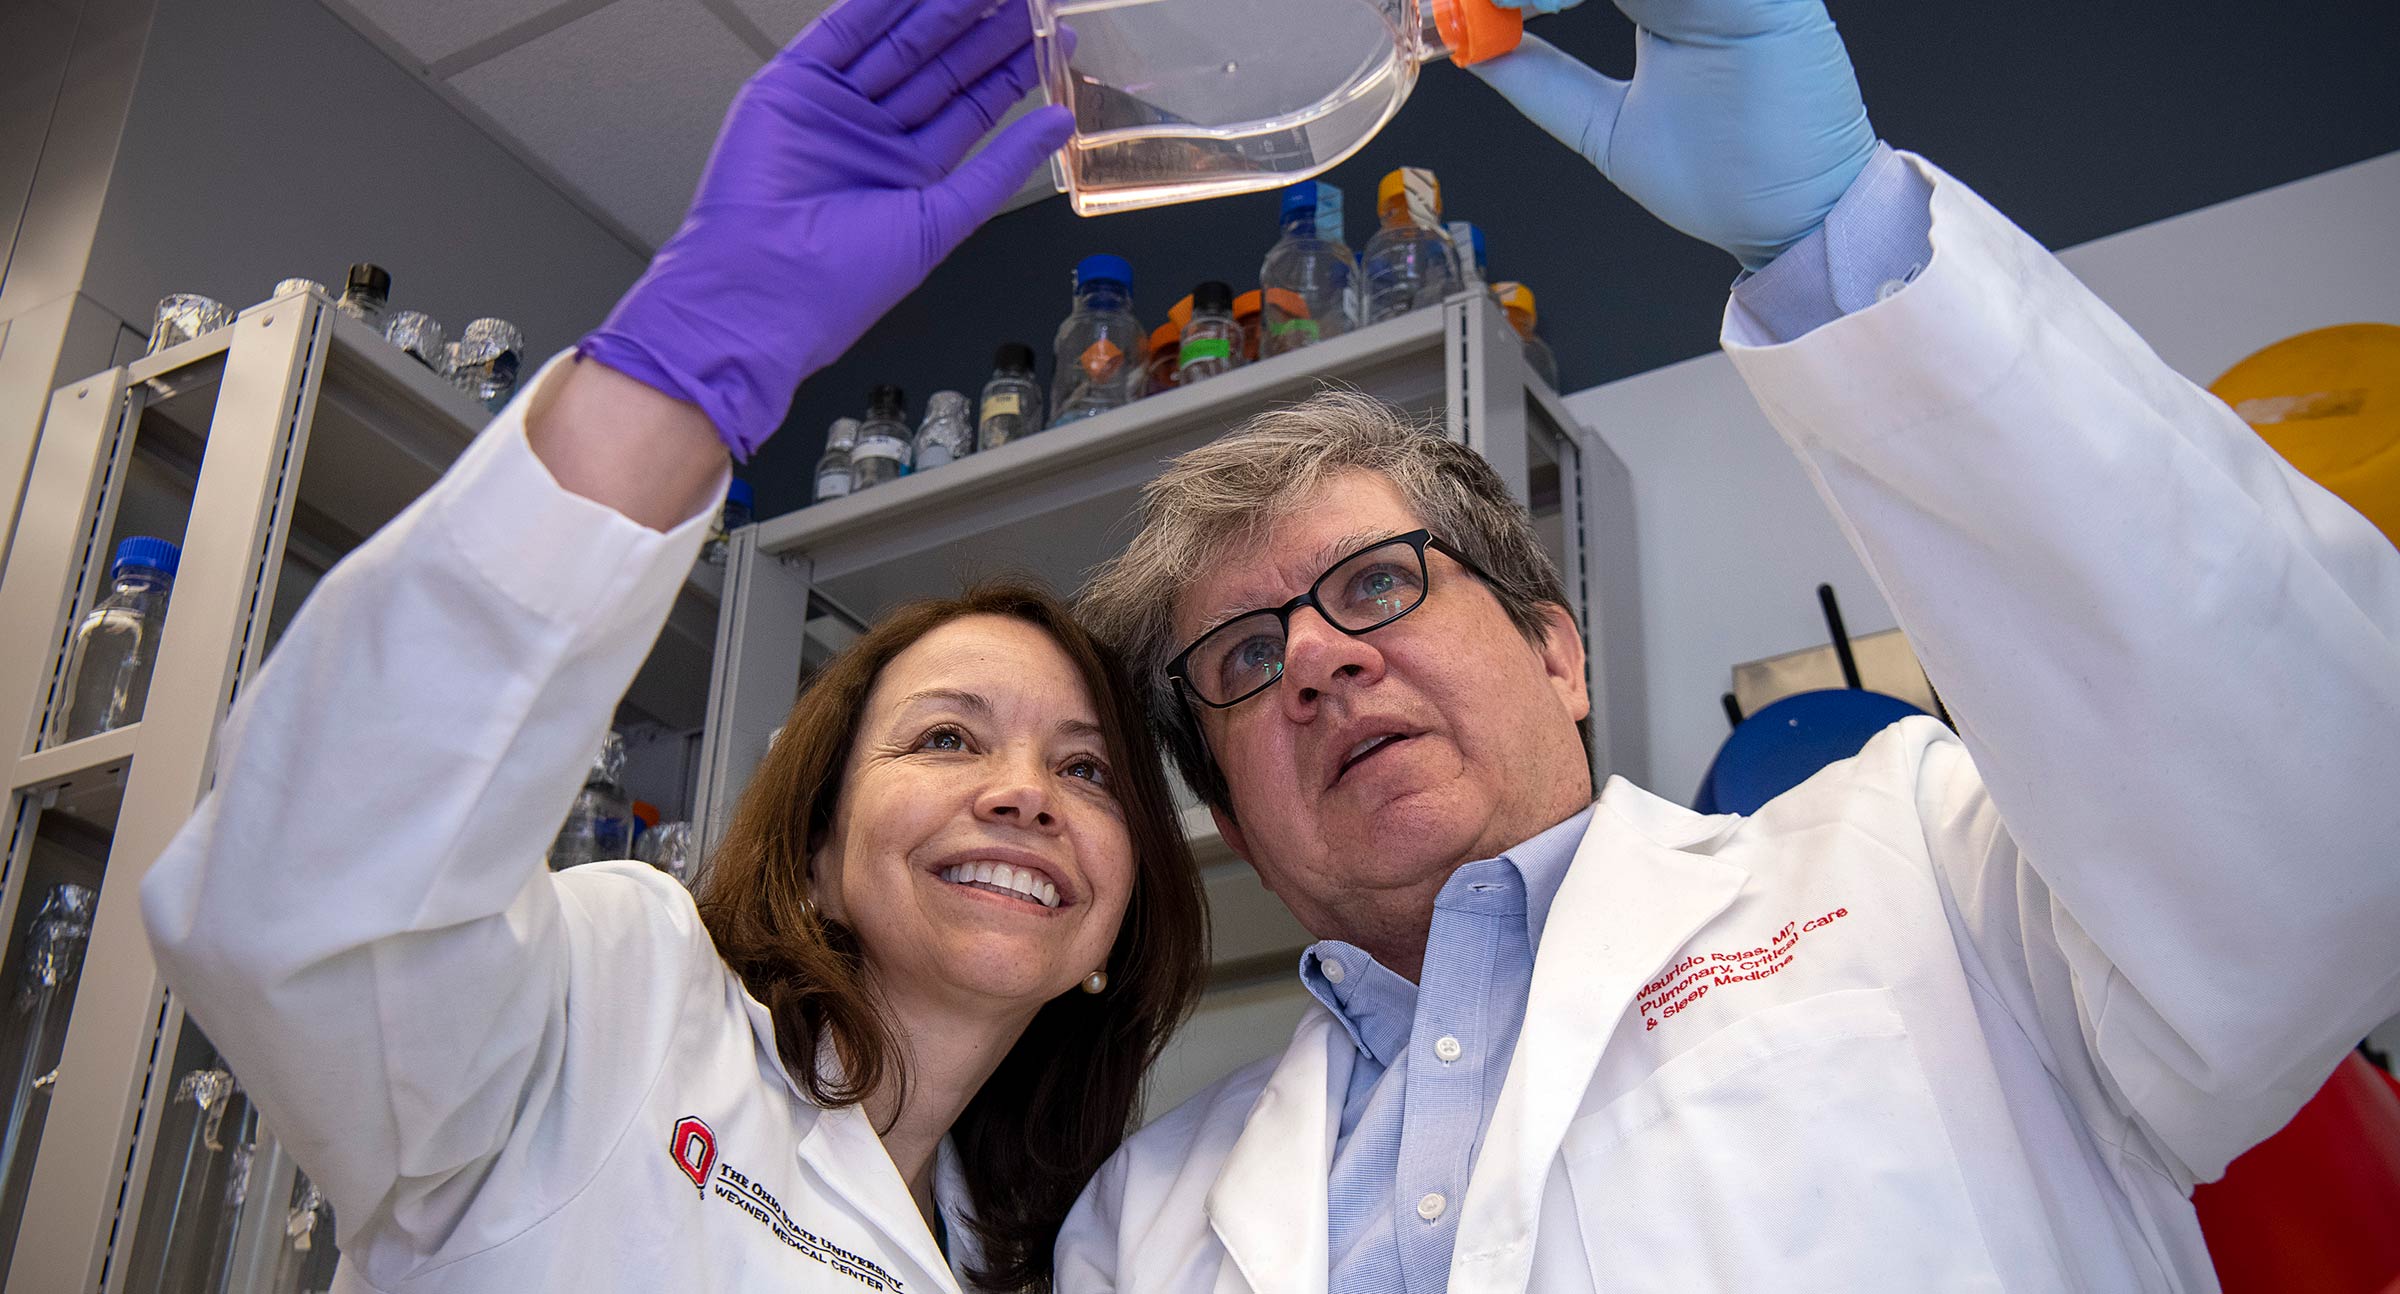 Mauricio Rojas, MD, and Ana Mora, MD working together in the lab